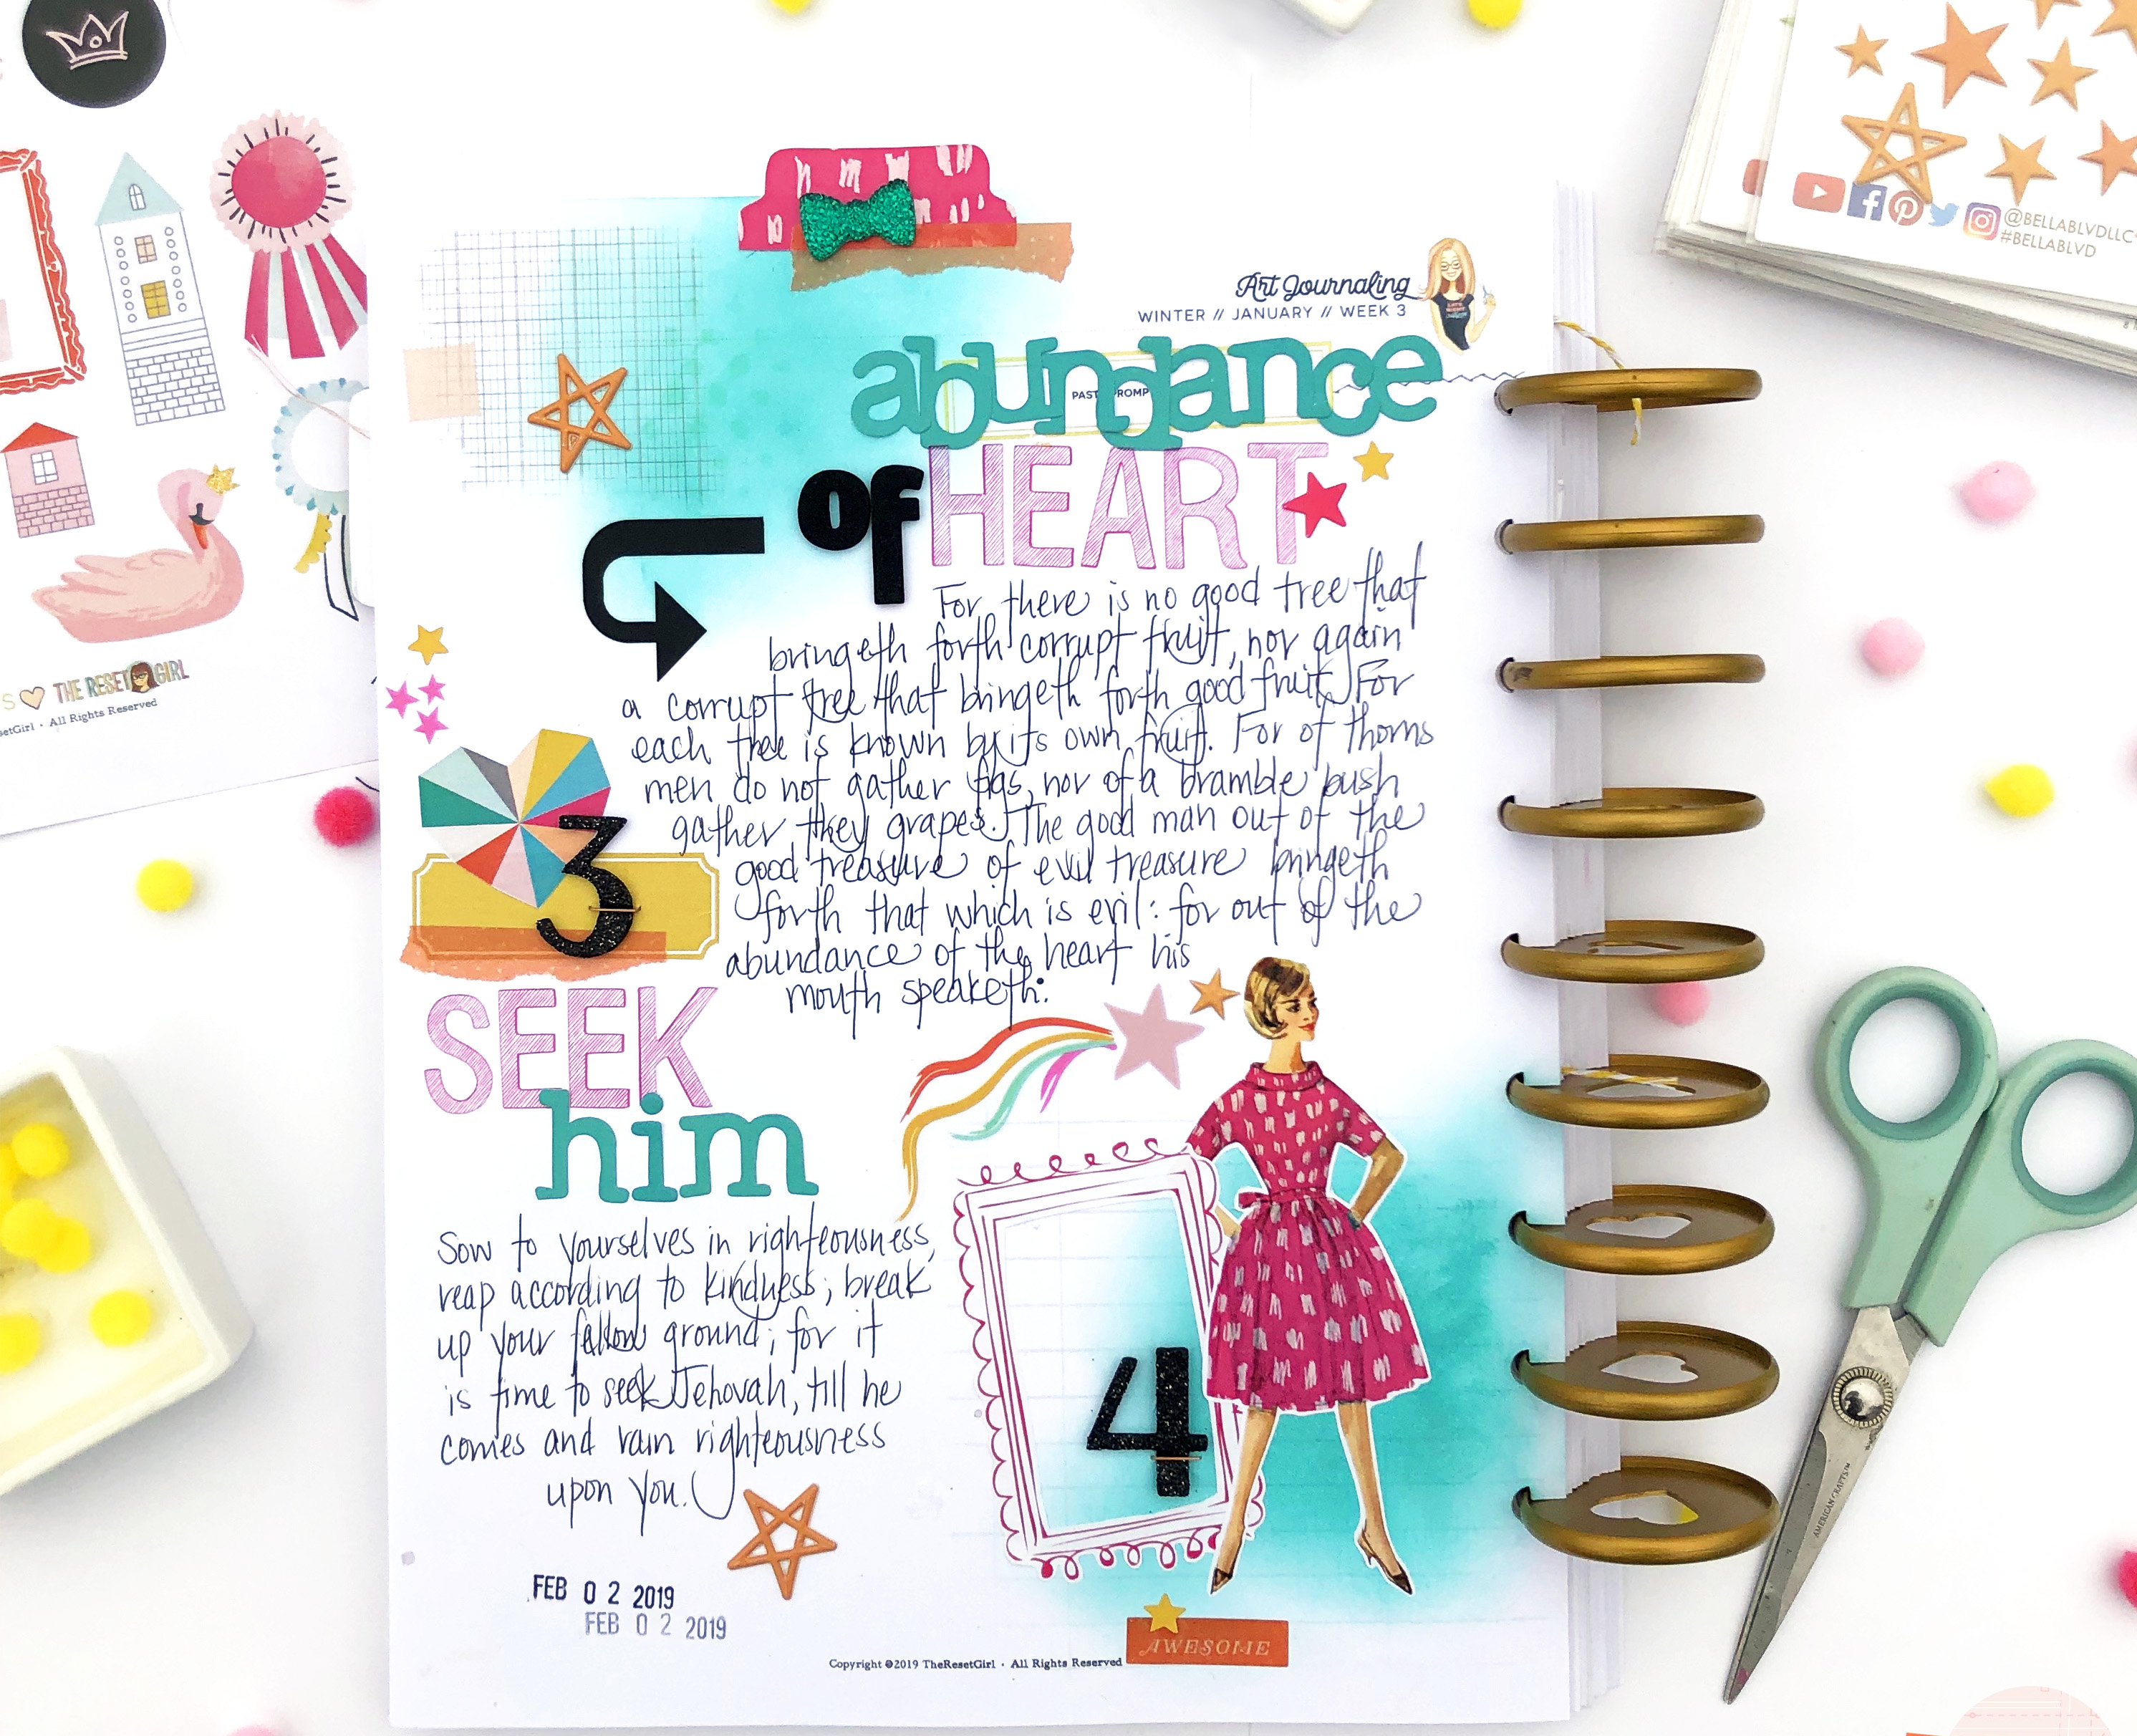 Pin on, Happy Planner Layout Ideas & Inspiration (Mambi)